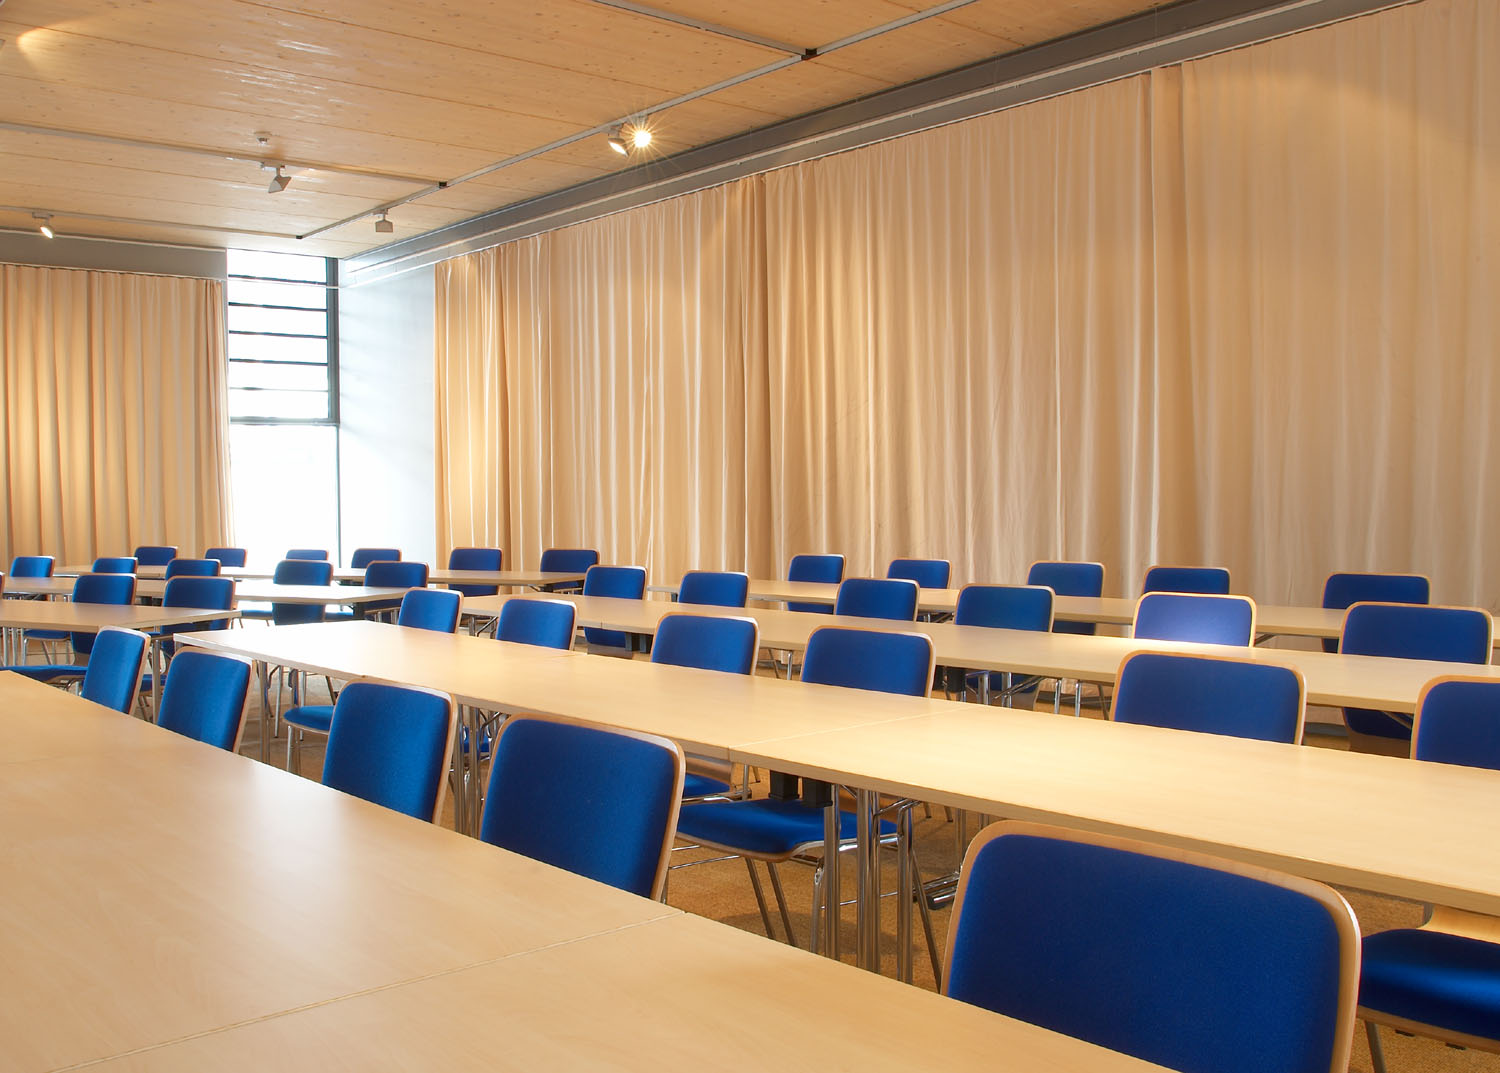 Classroom seating in the event room